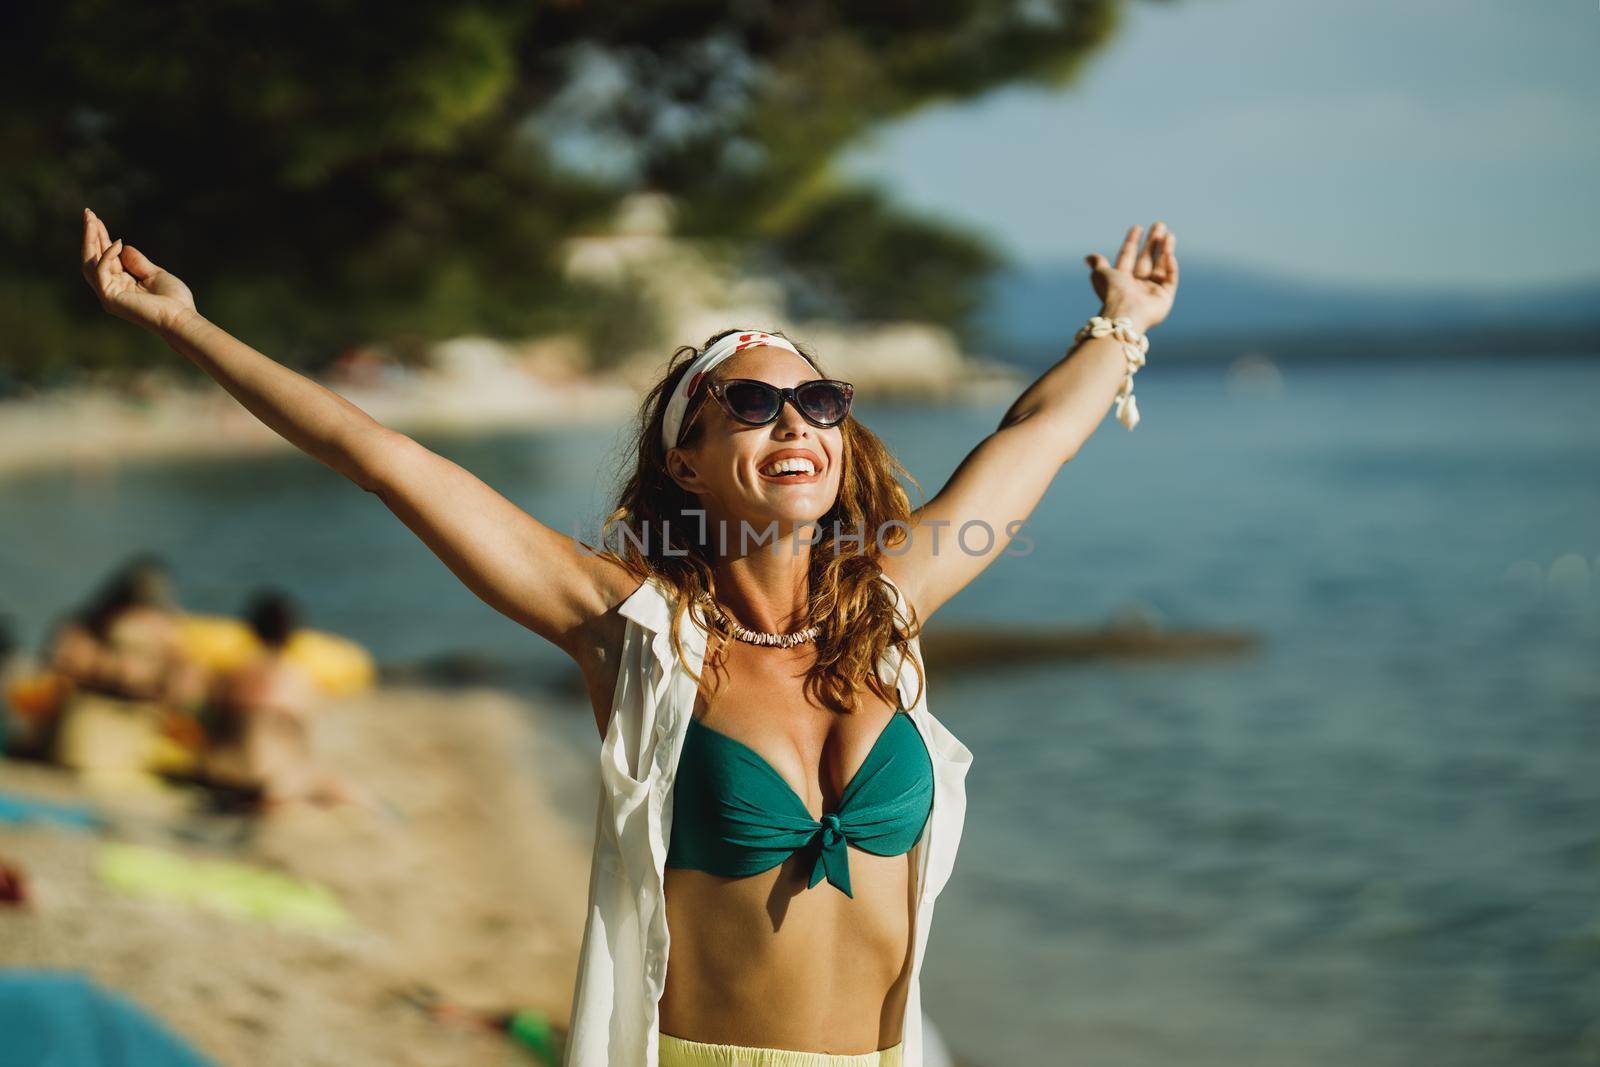 An attractive young woman in bikini is having fun on the beach and enjoying a summer vacation.